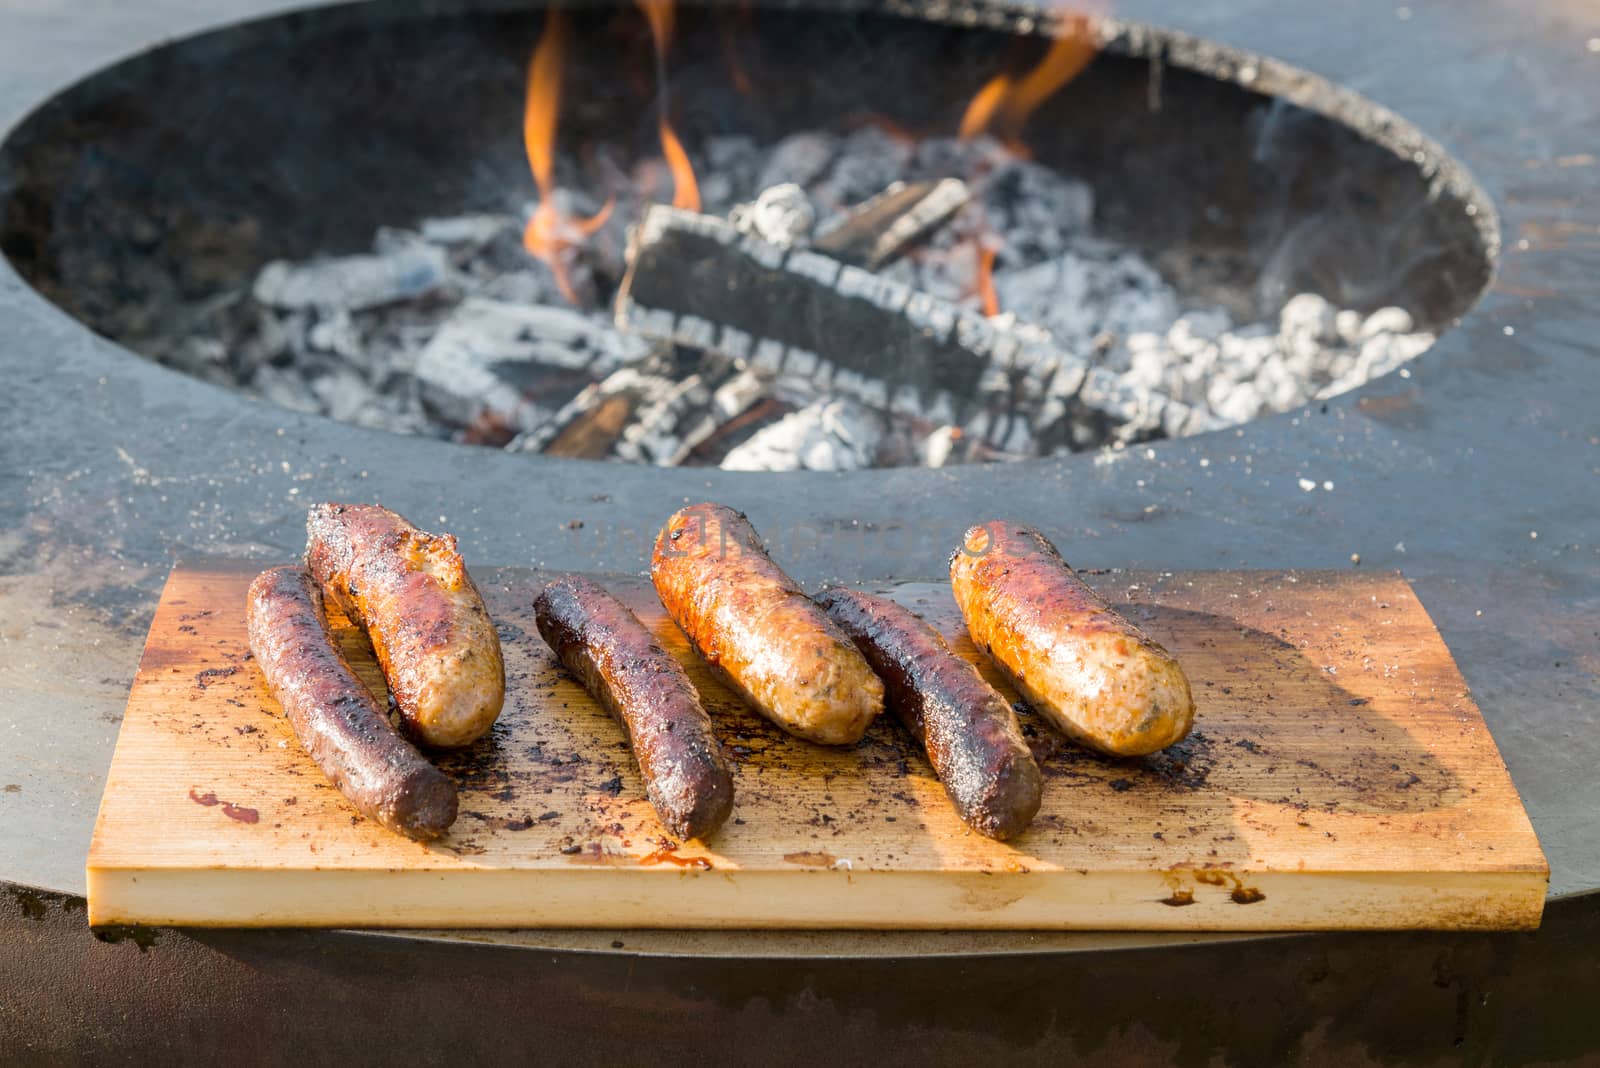 Grilling sausages on barbecue grill by vlaru